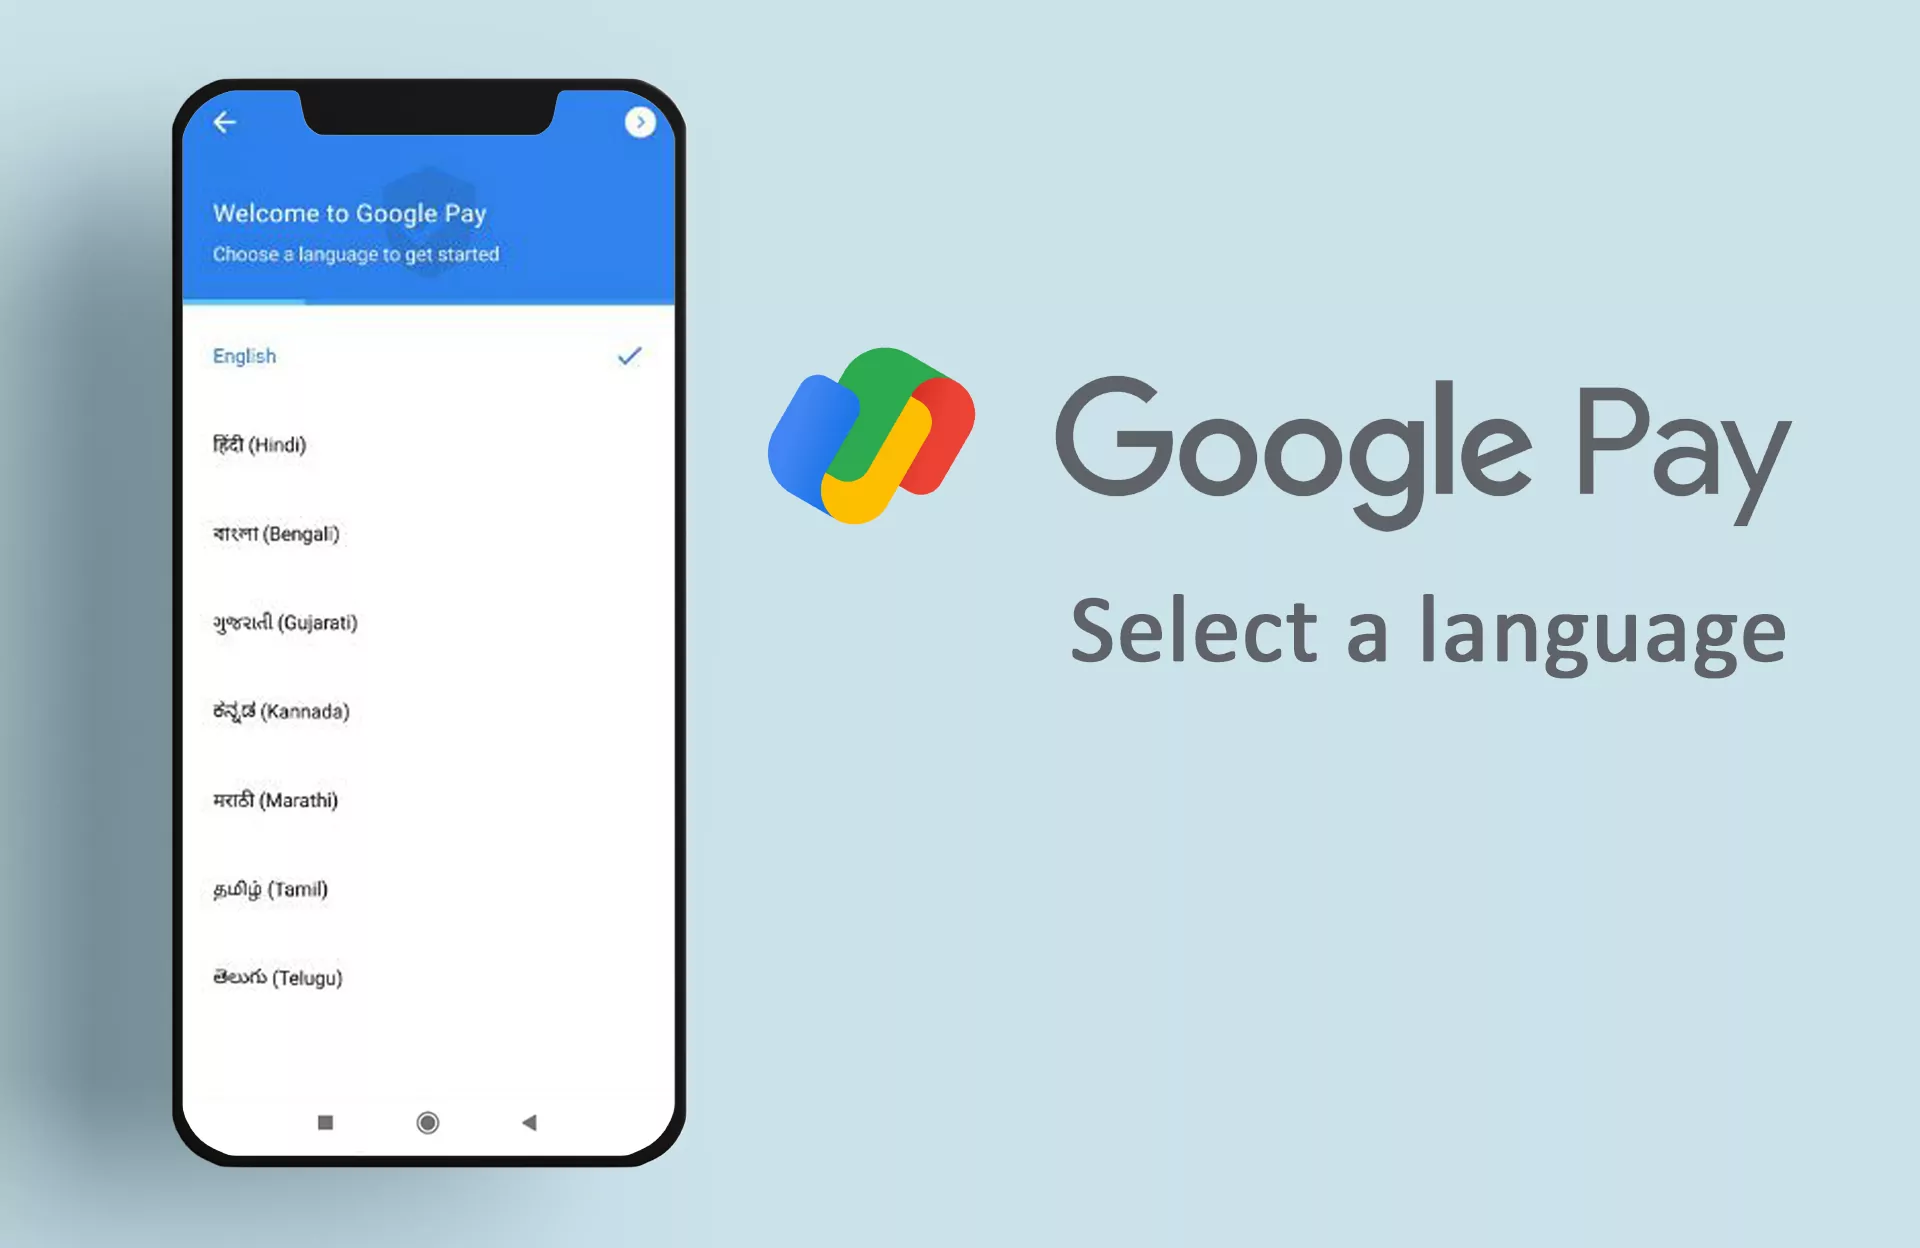 Choose the language of the app.